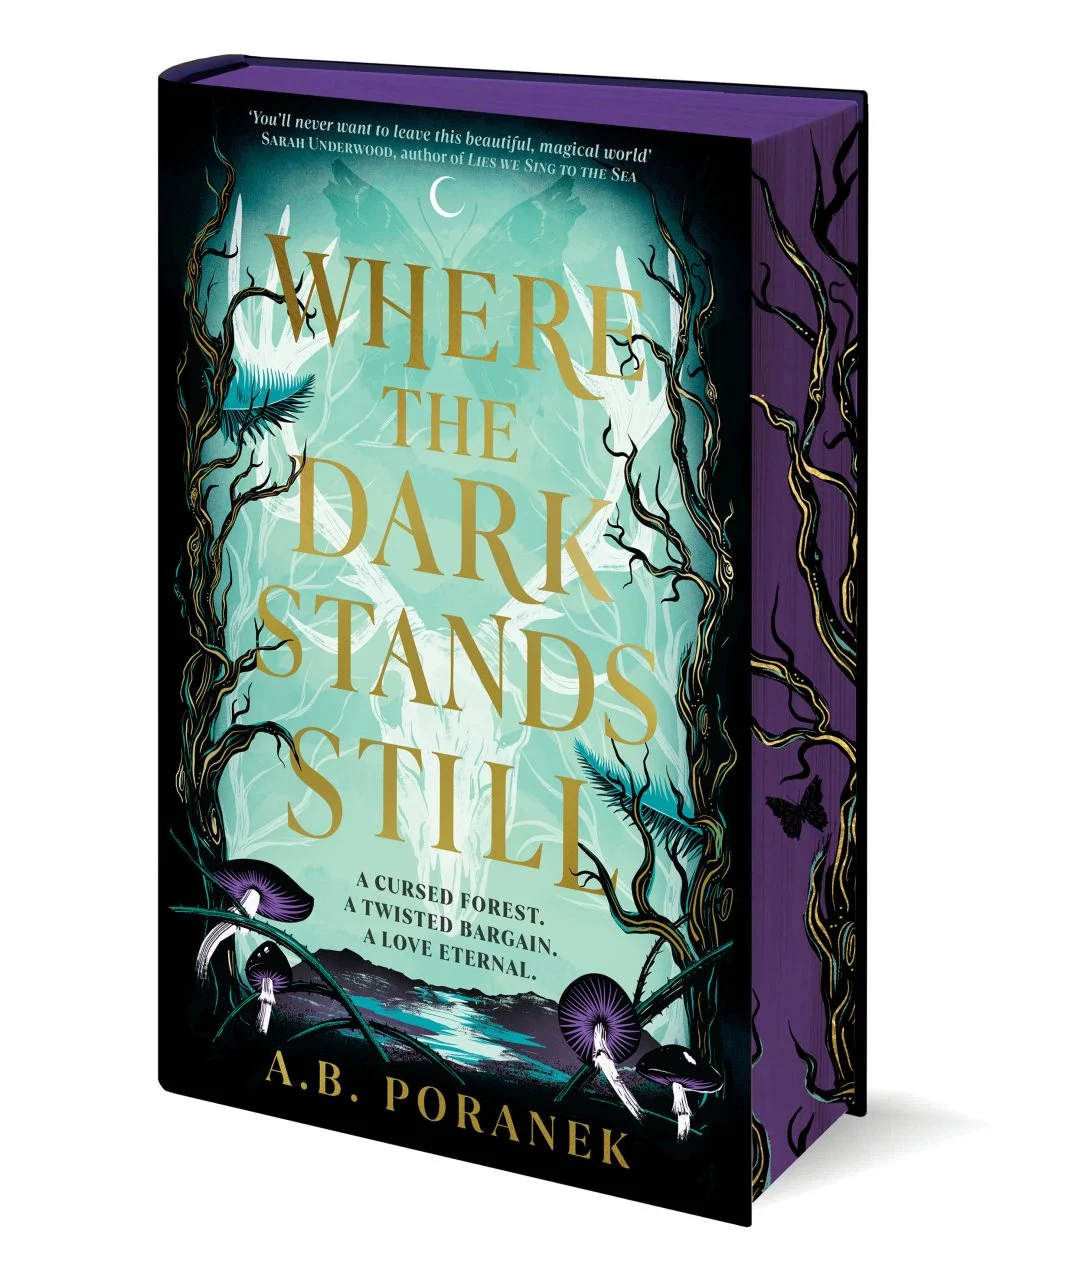 Cover of Where the Dark Stands Still